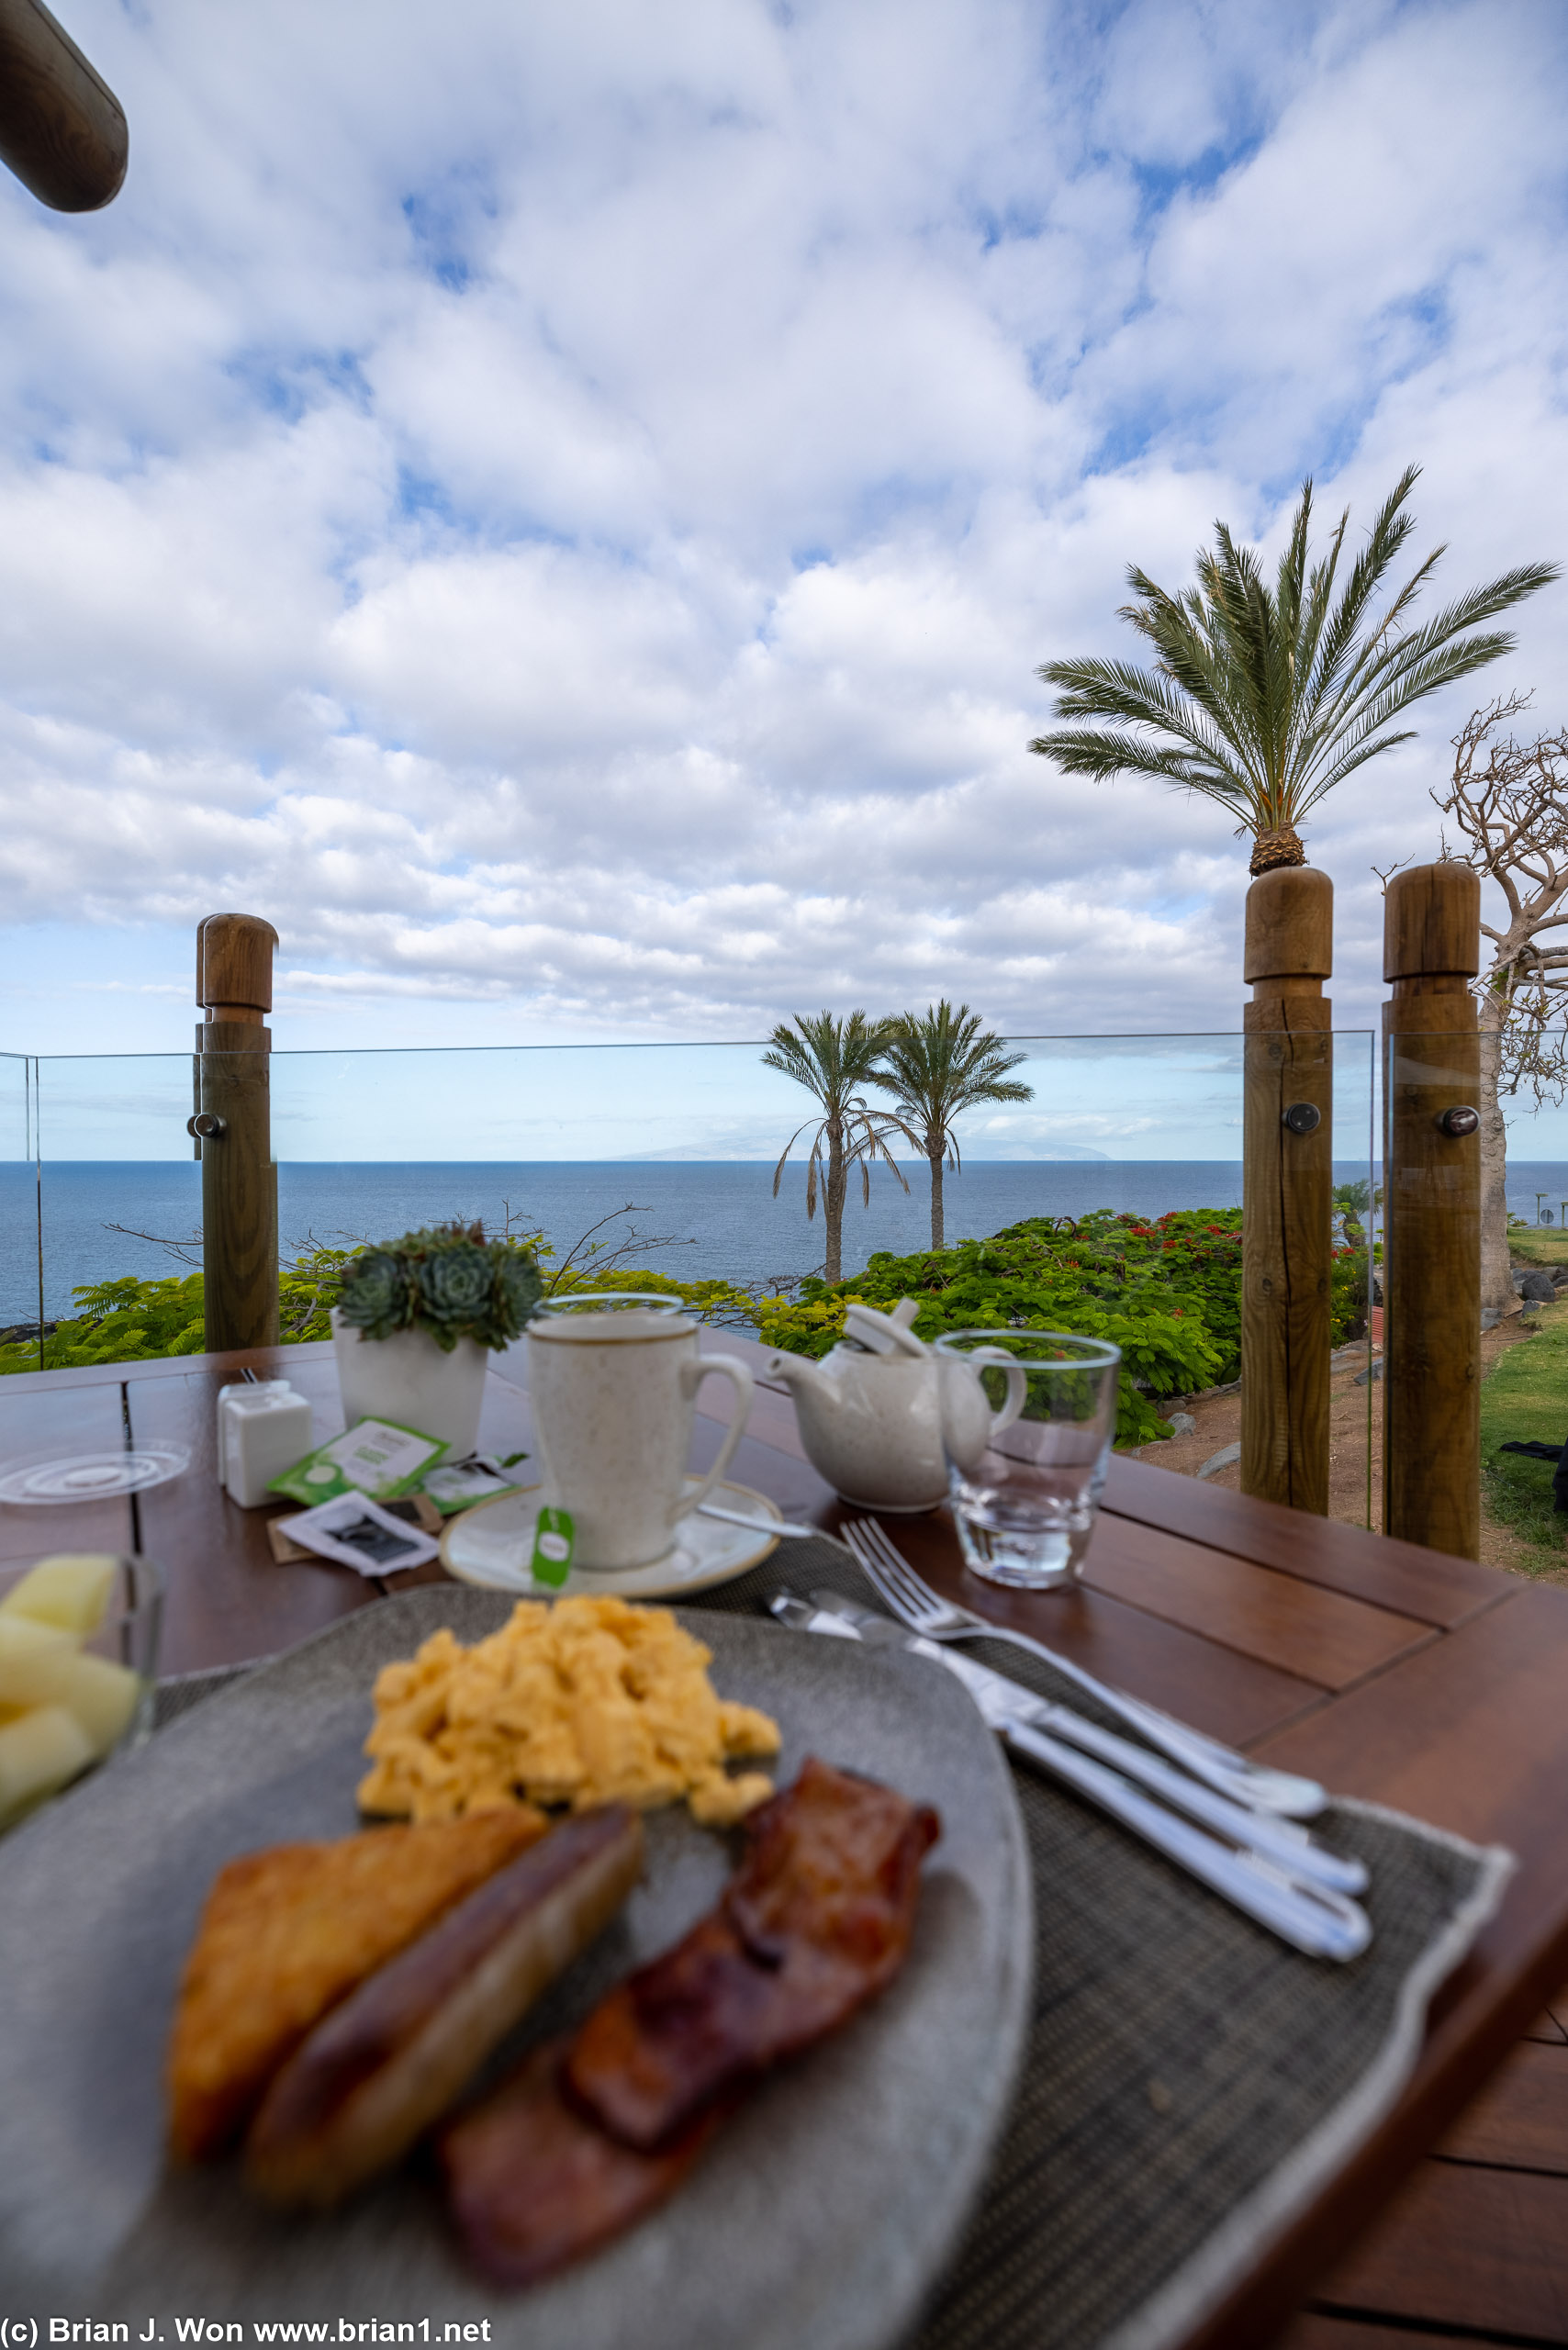 Breakfast with a view.